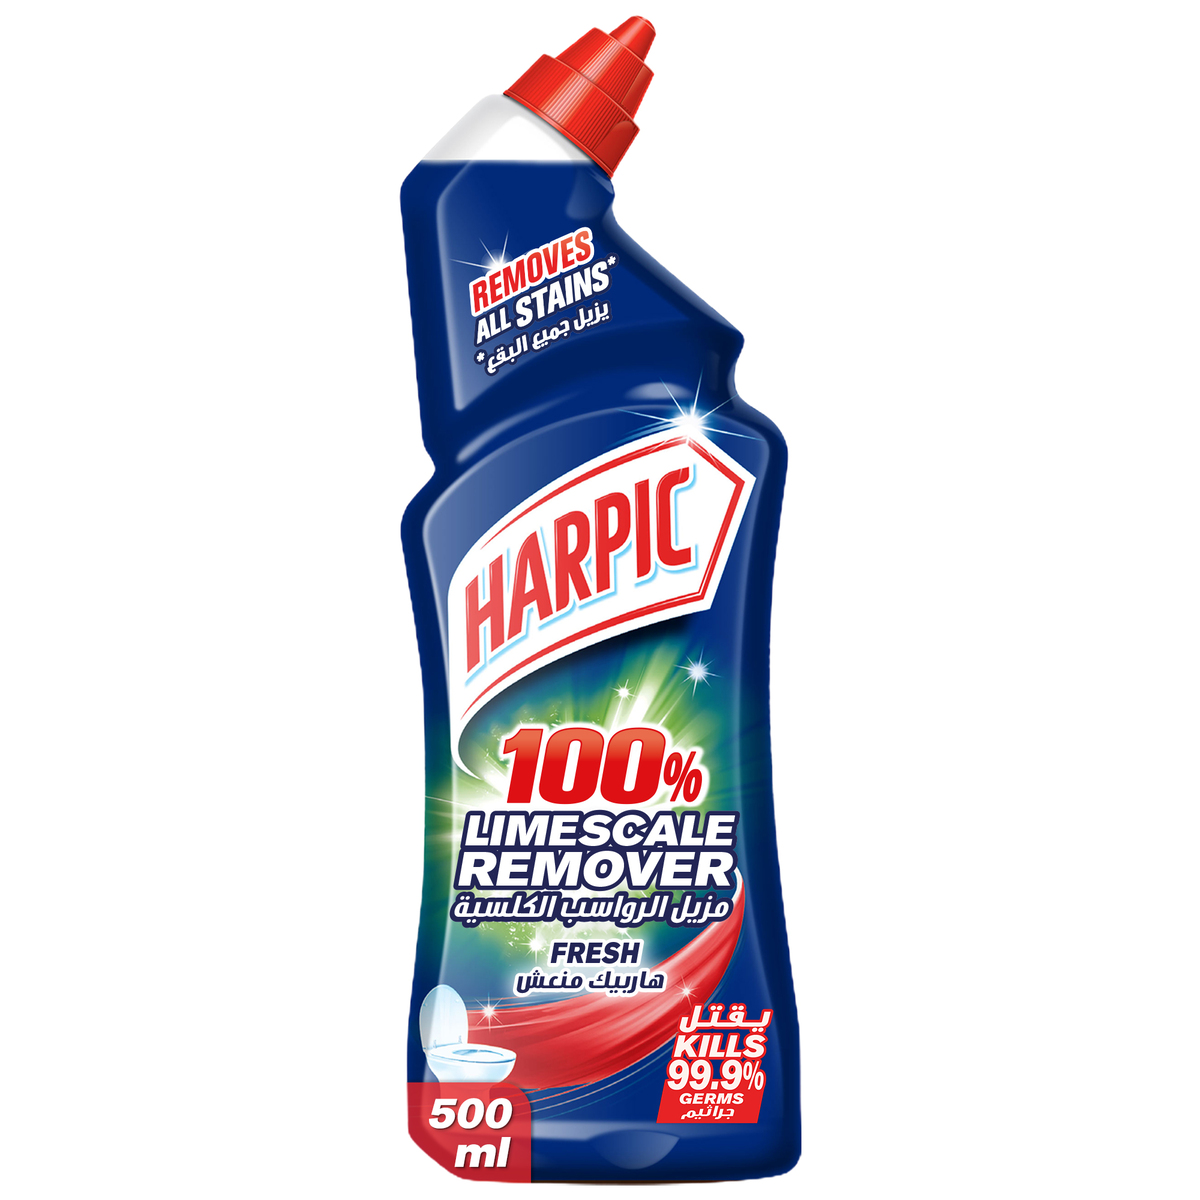 Harpic Fresh Toilet Cleaner 100% Limescale Remover 500 ml